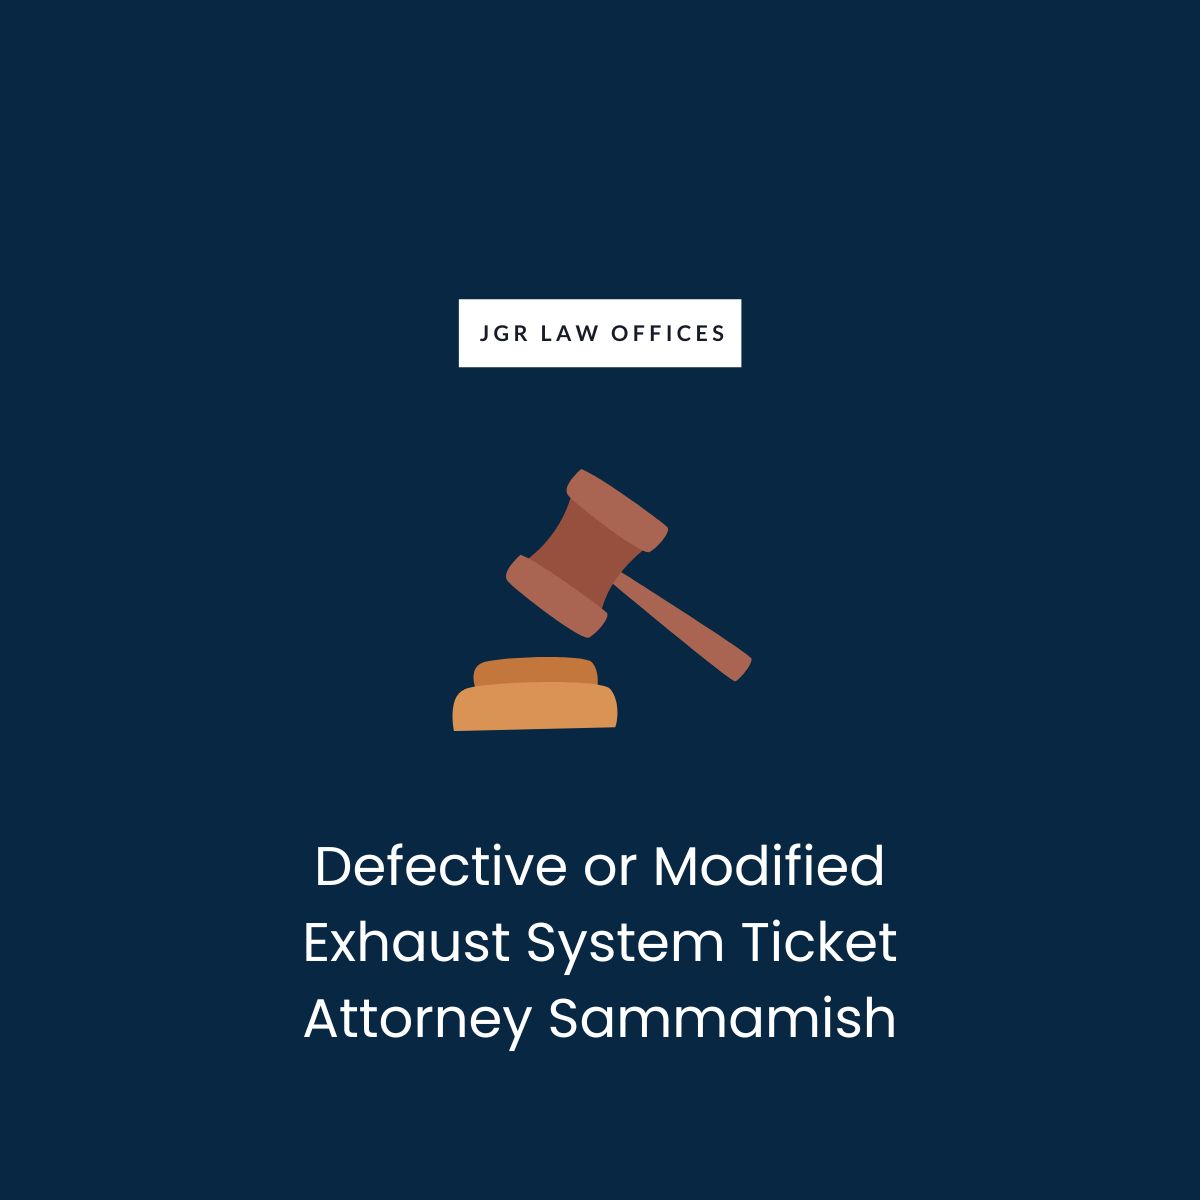 Defective or Modified Exhaust System Ticket Attorney Sammamish